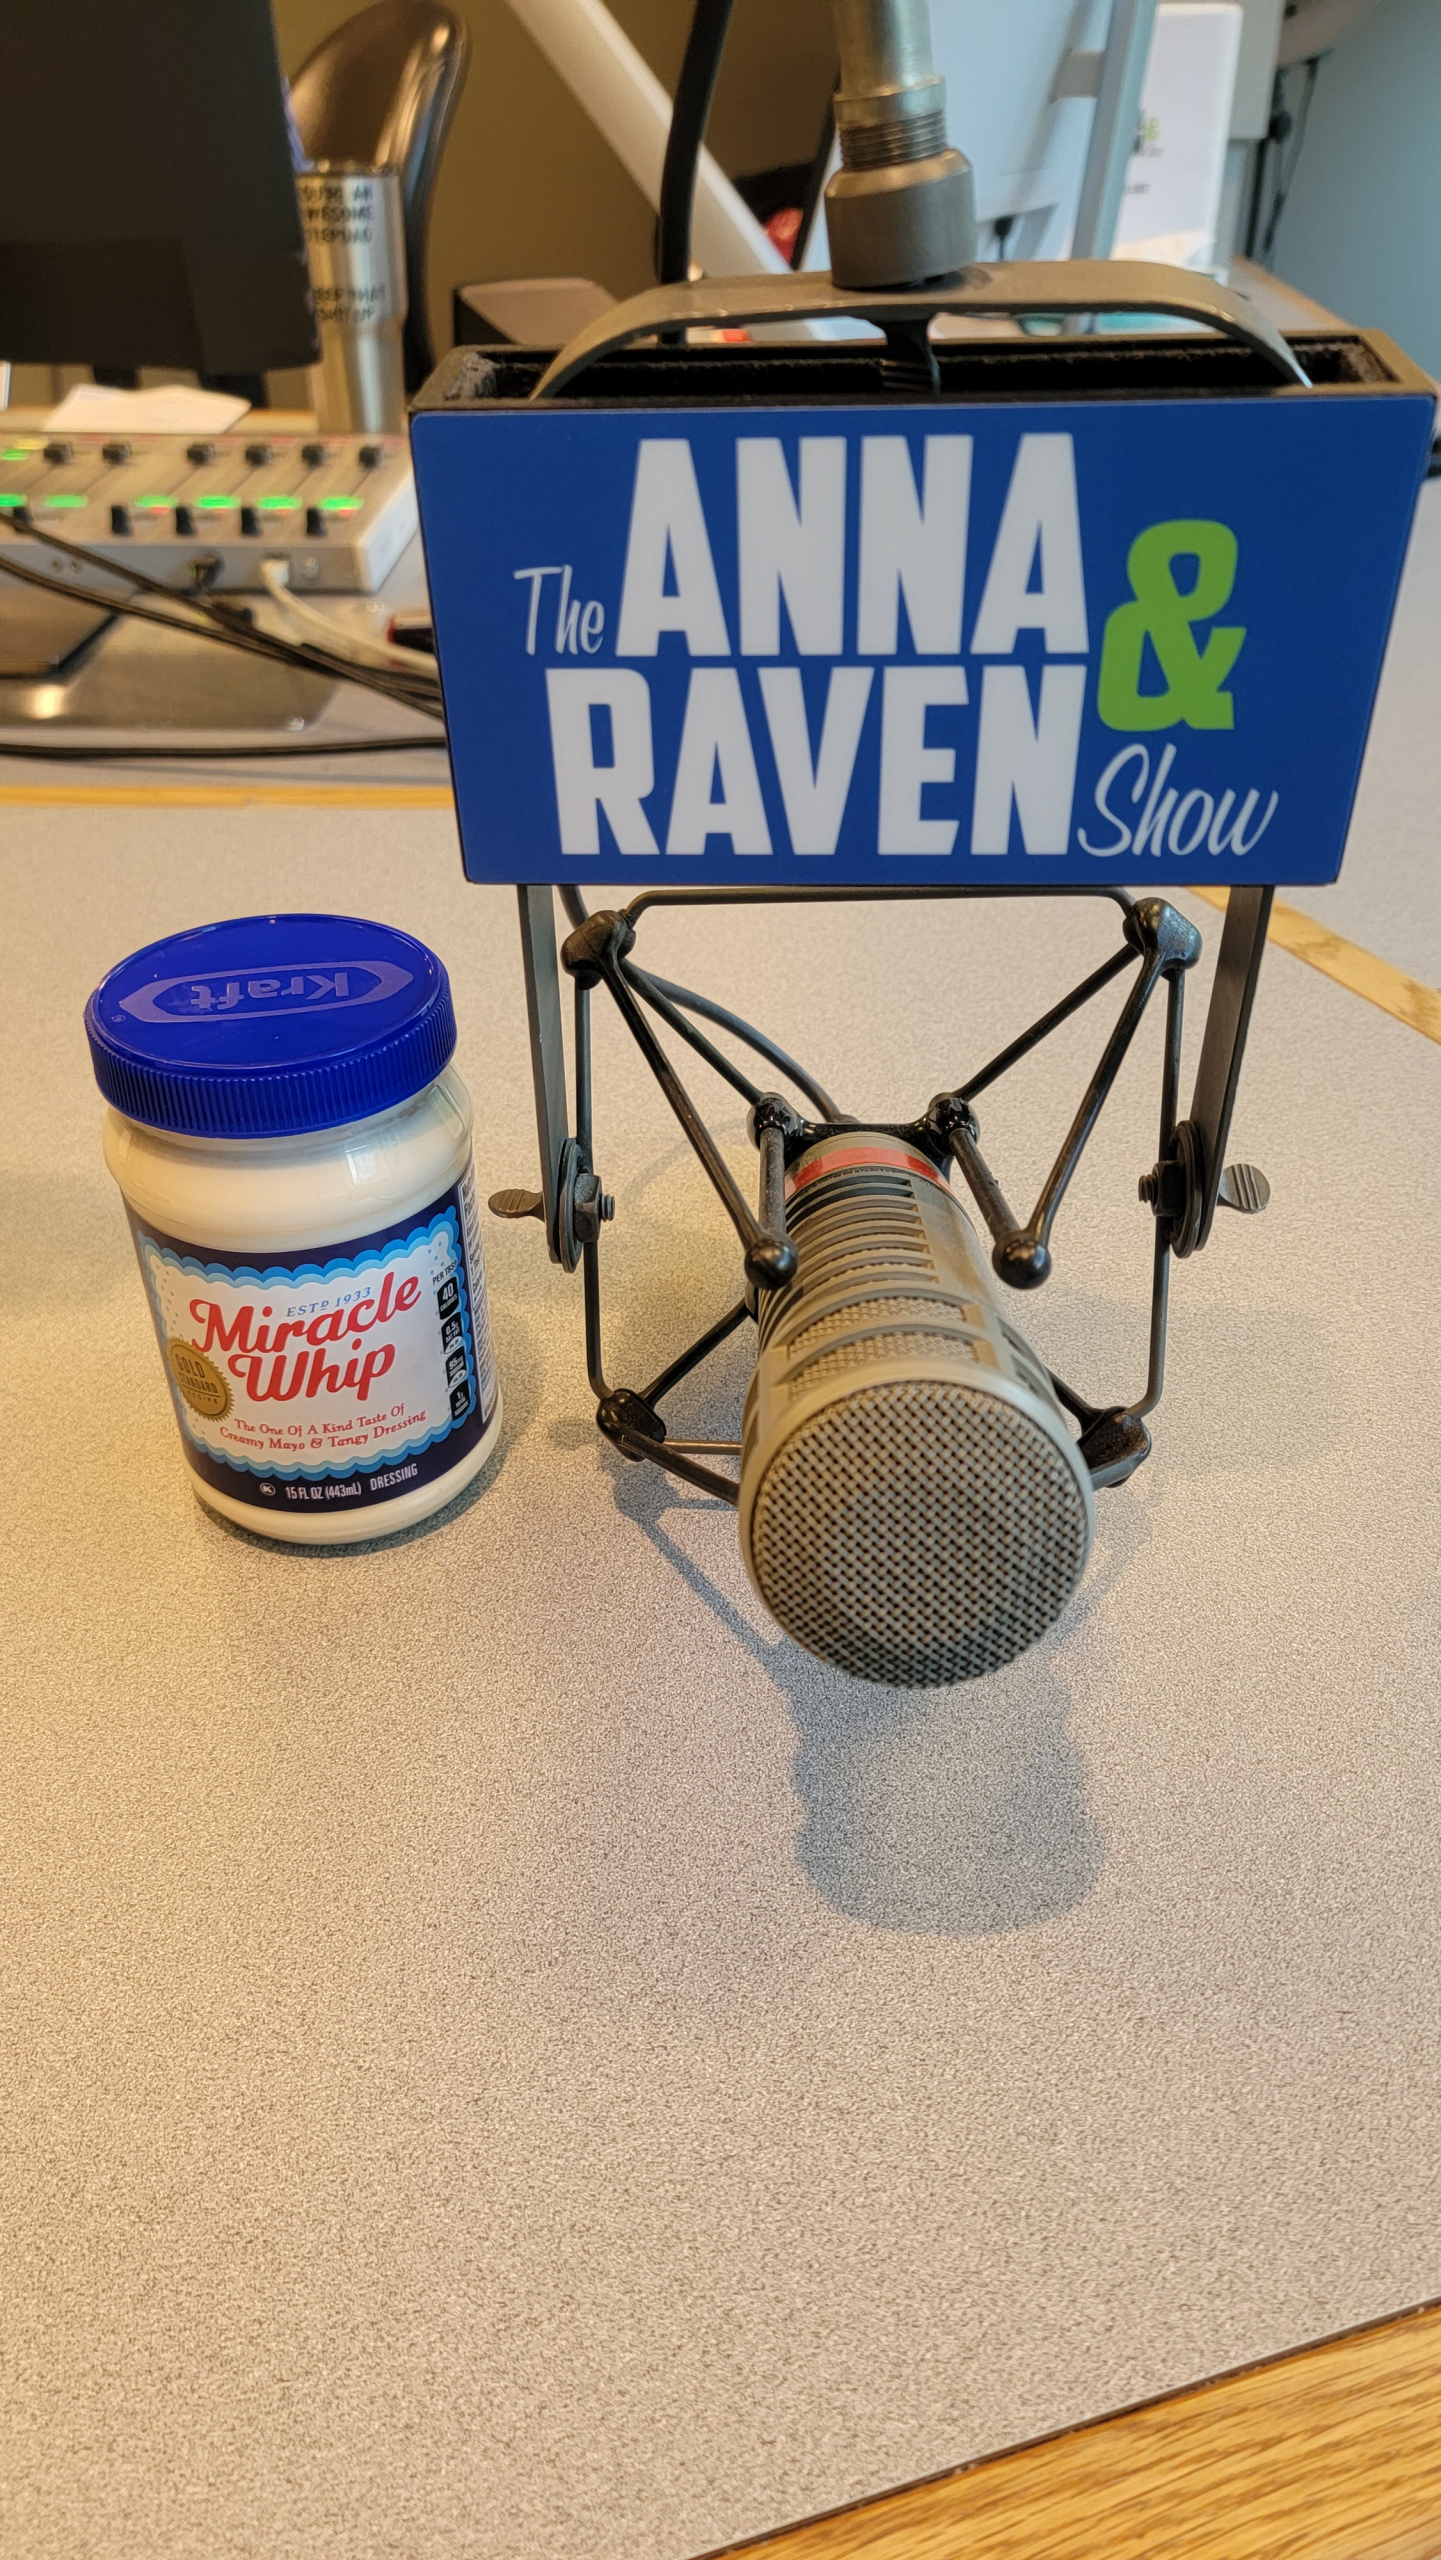 Anna & Raven: The Miracle Whip Debate